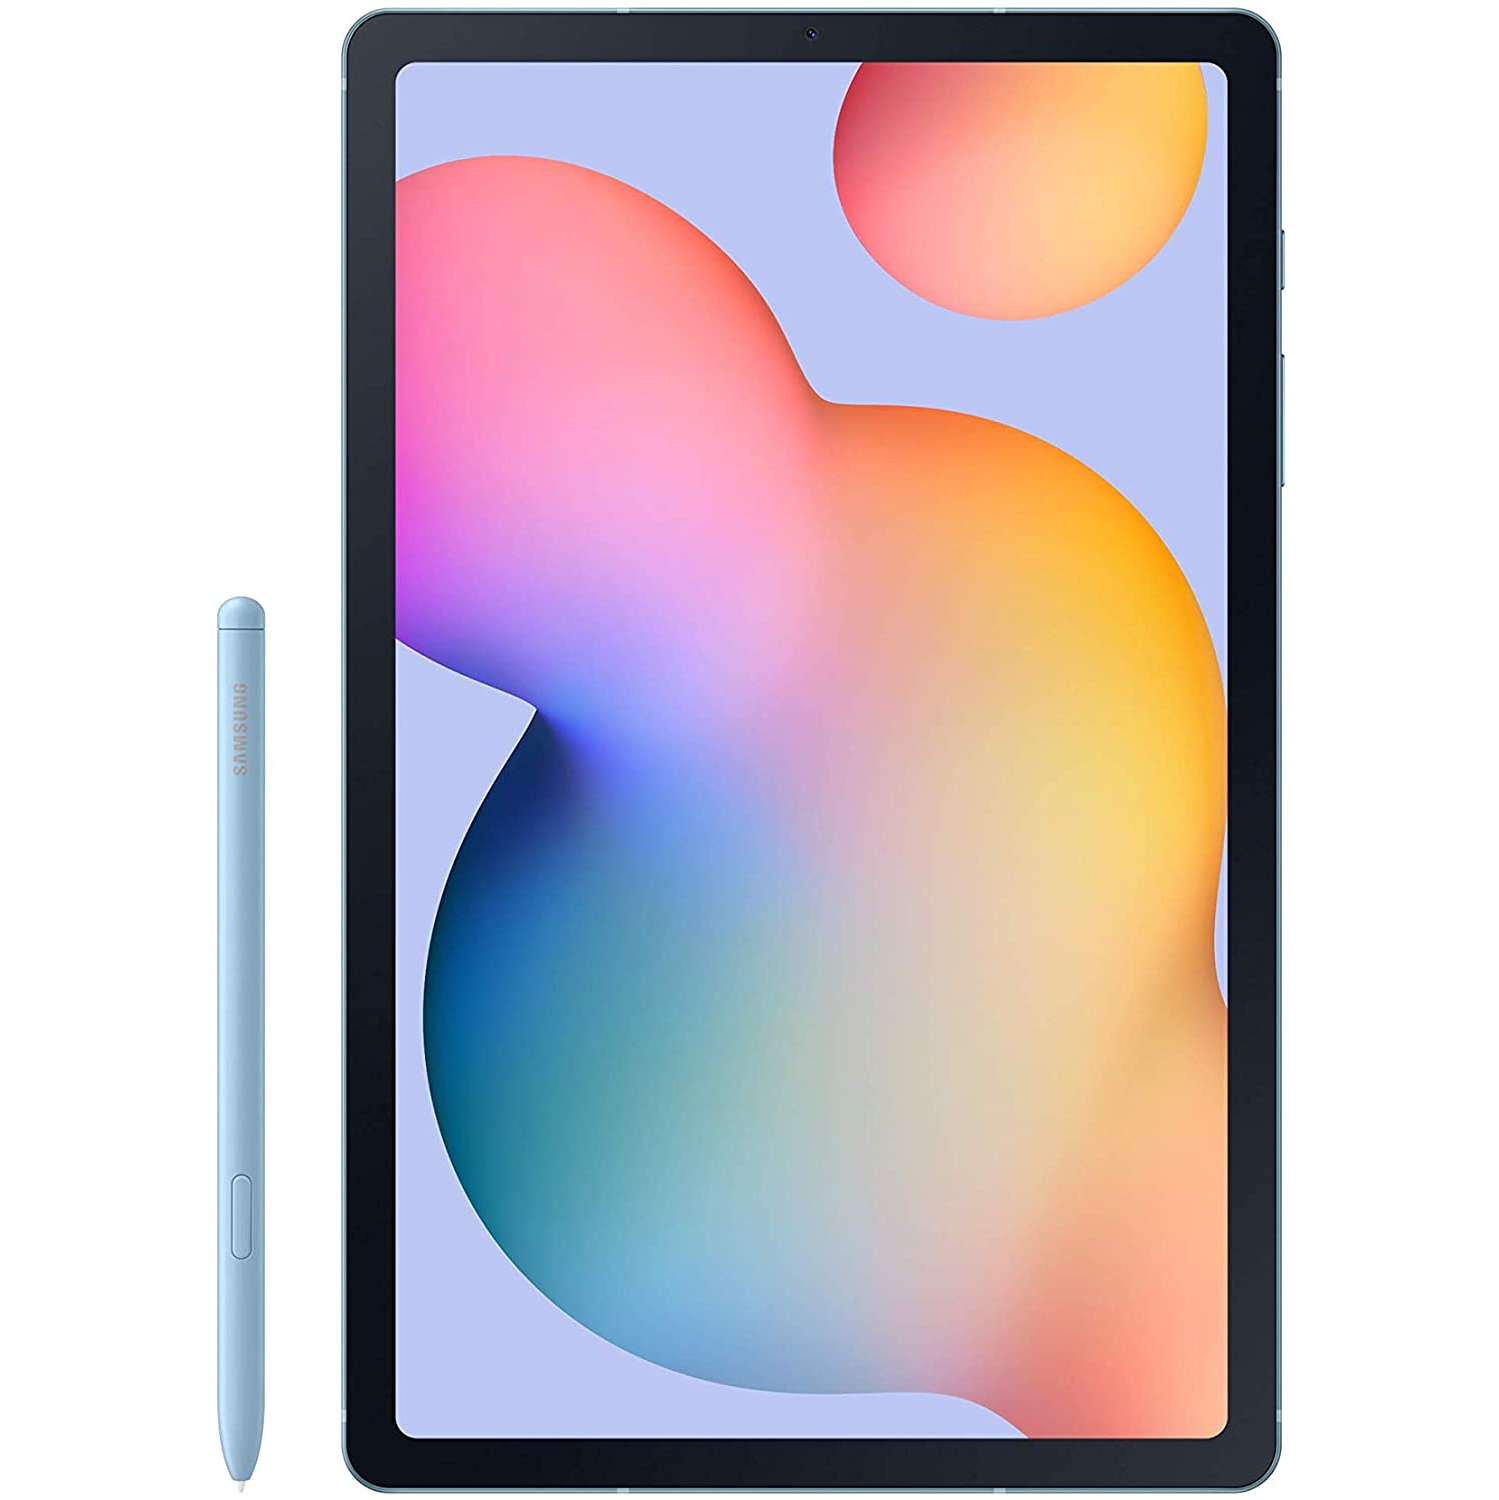 Refurbished (Excellent) - Samsung Galaxy Tab S6 Lite, 10.4" Display 64GB Storage Angora Blue Wi-Fi SM-P610NZBAXAC Android Tablet with Exynos 9611 8-Core